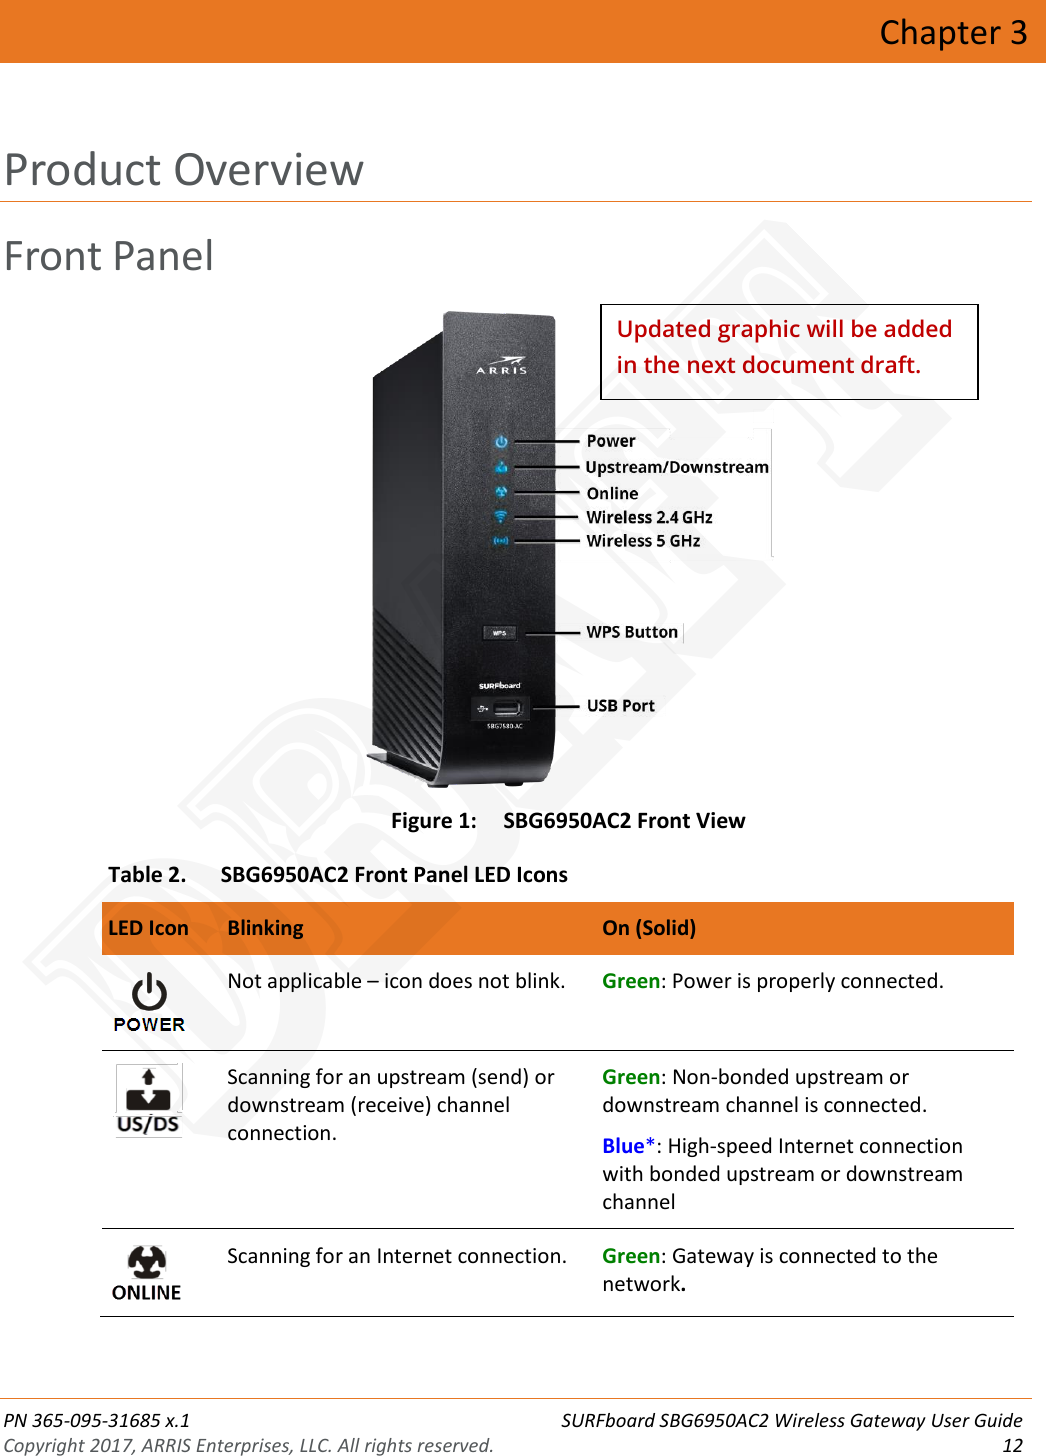  PN 365-095-31685 x.1 SURFboard SBG6950AC2 Wireless Gateway User Guide Copyright 2017, ARRIS Enterprises, LLC. All rights reserved. 12  Chapter 3 Product Overview Front Panel  Figure 1: SBG6950AC2 Front View Table 2. SBG6950AC2 Front Panel LED Icons  LED Icon Blinking On (Solid)    Not applicable – icon does not blink. Green: Power is properly connected.     Scanning for an upstream (send) or downstream (receive) channel connection. Green: Non-bonded upstream or downstream channel is connected. Blue*: High-speed Internet connection with bonded upstream or downstream channel    Scanning for an Internet connection. Green: Gateway is connected to the network. Updated graphic will be added in the next document draft. DRAFT